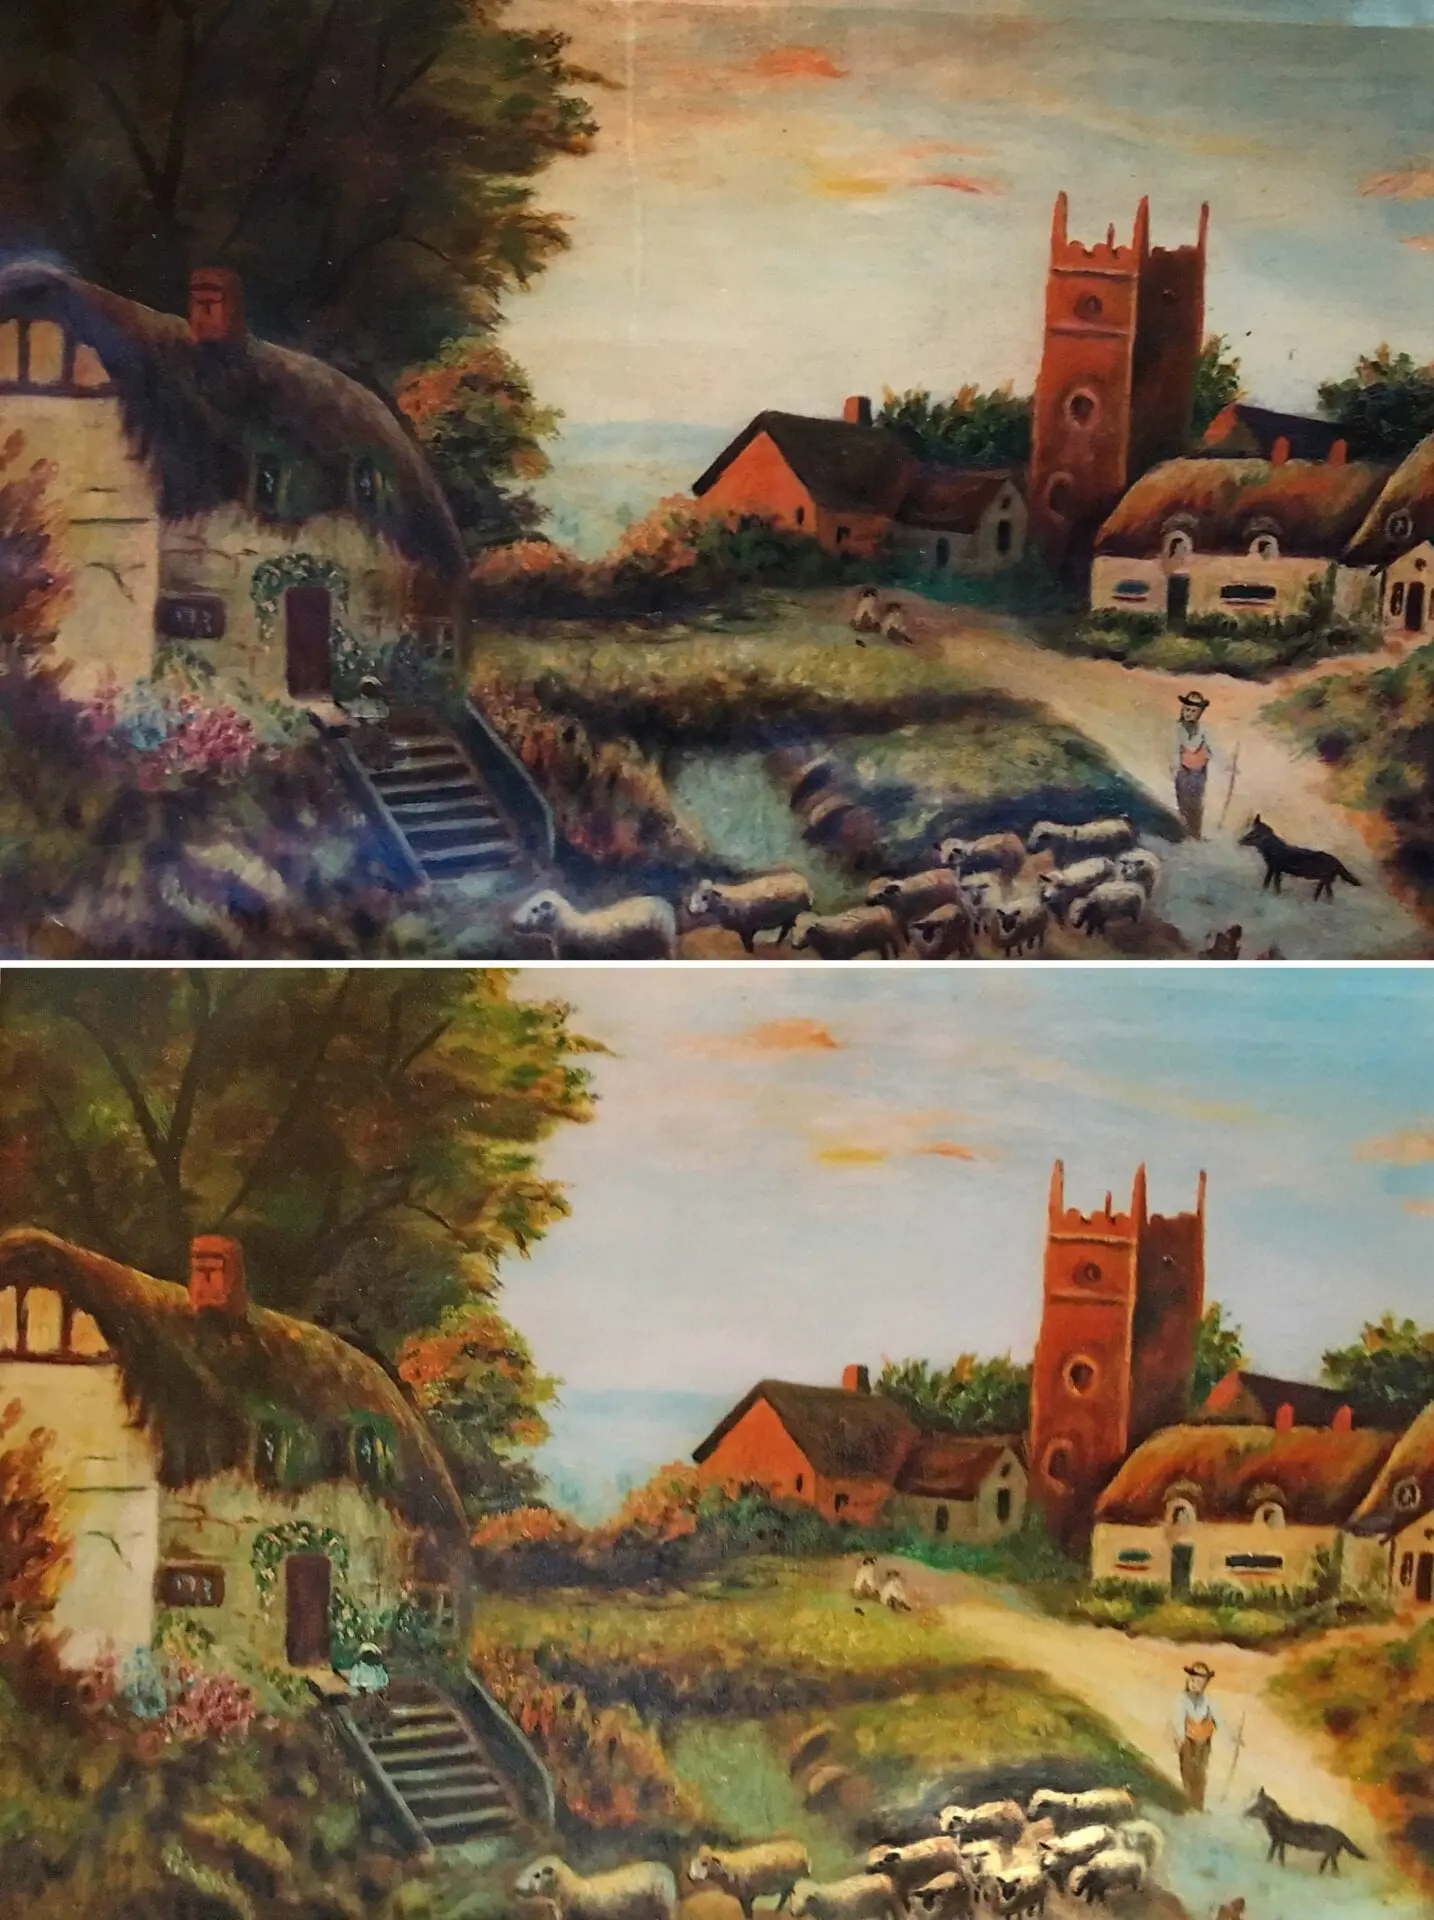 A painting of two different scenes with one being the same scene.